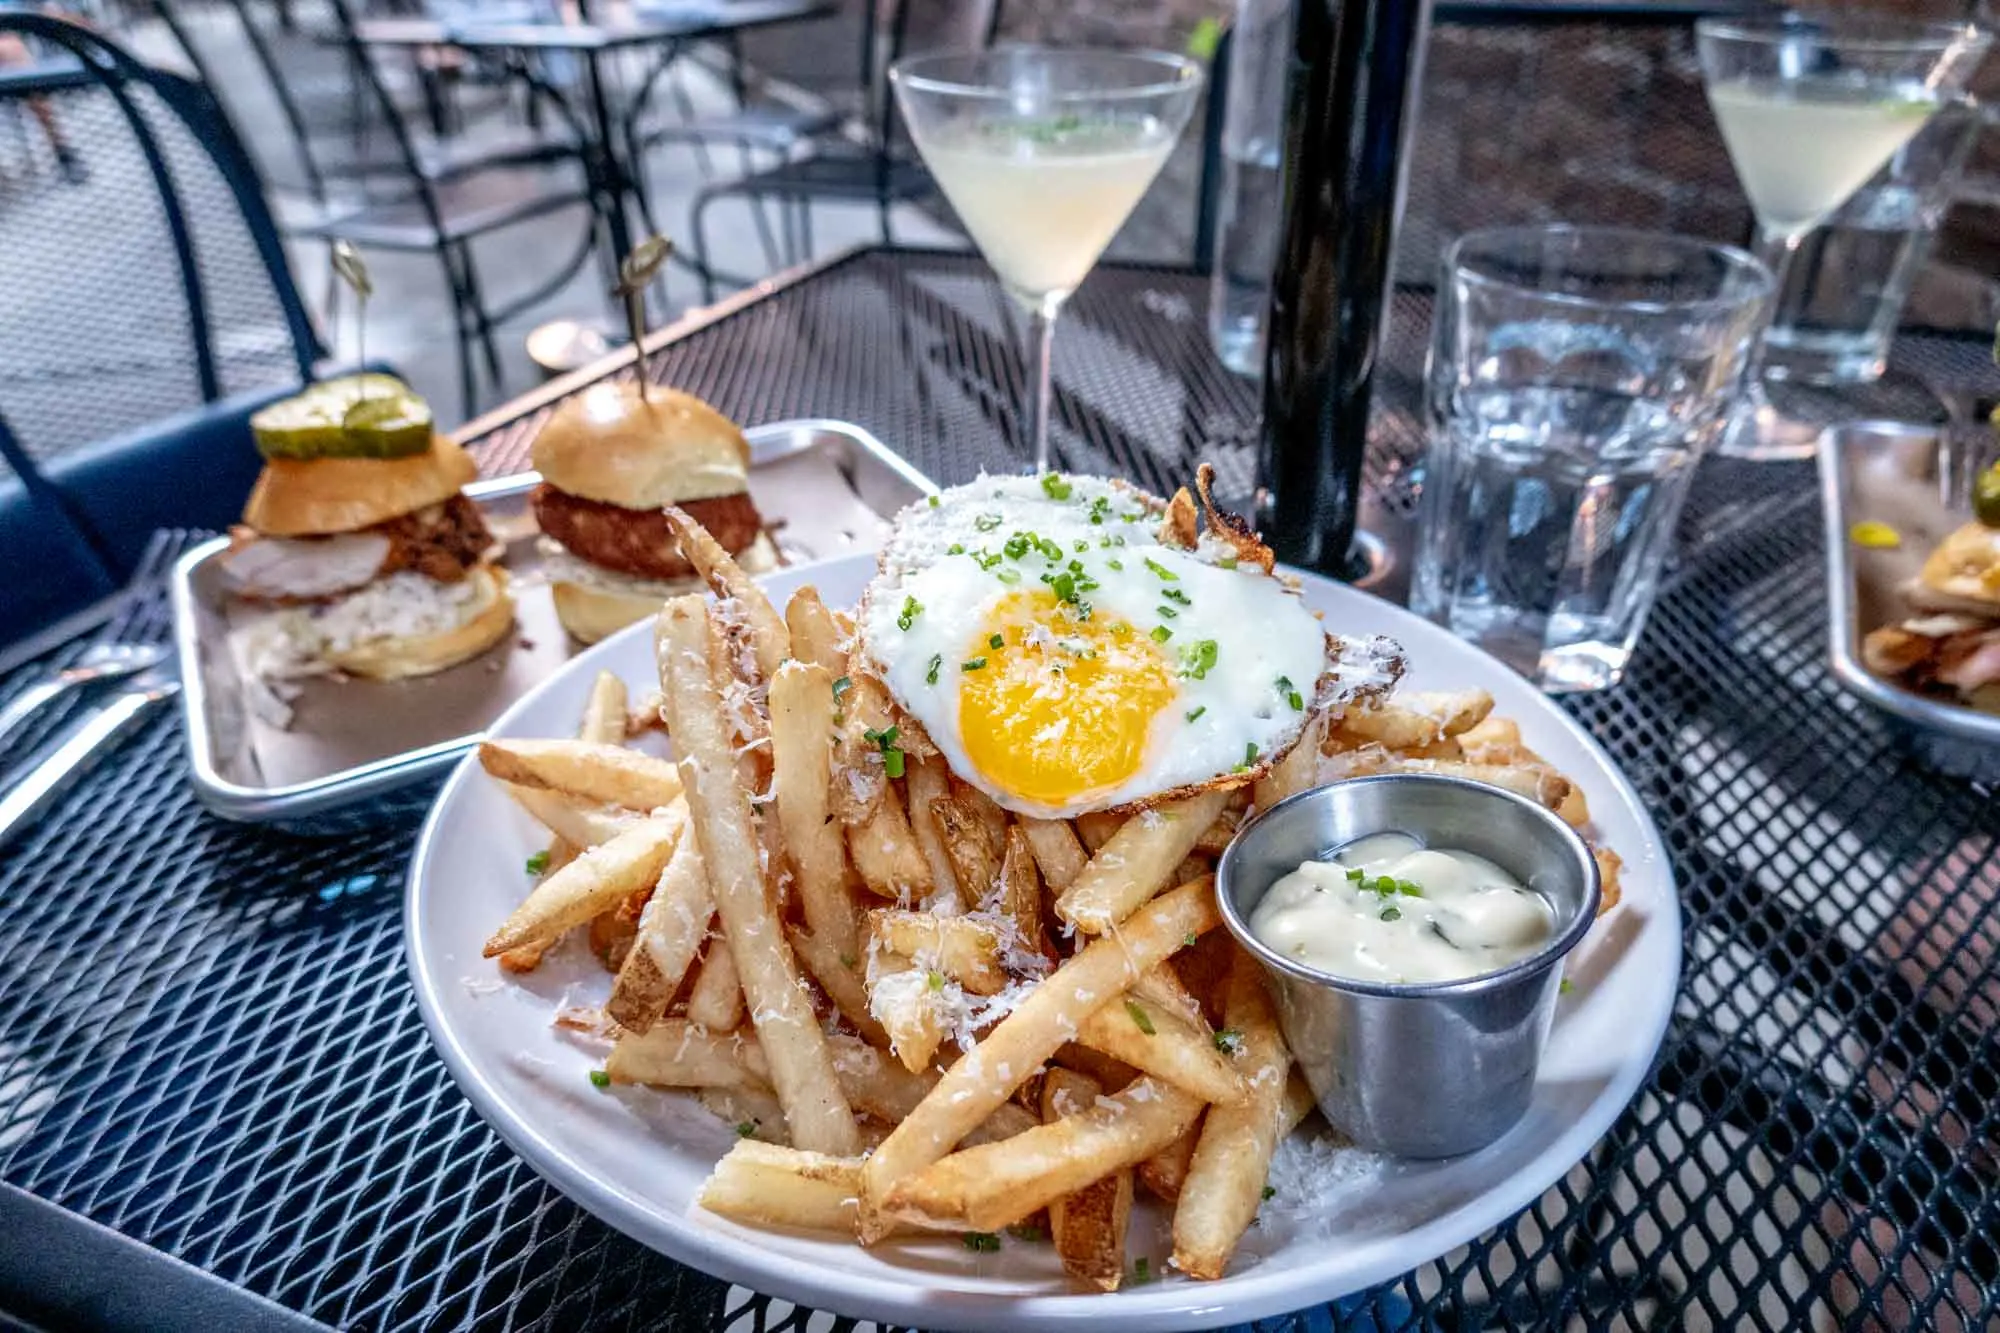 Sliders on a platter next to a plate of French fries topped with a fried egg